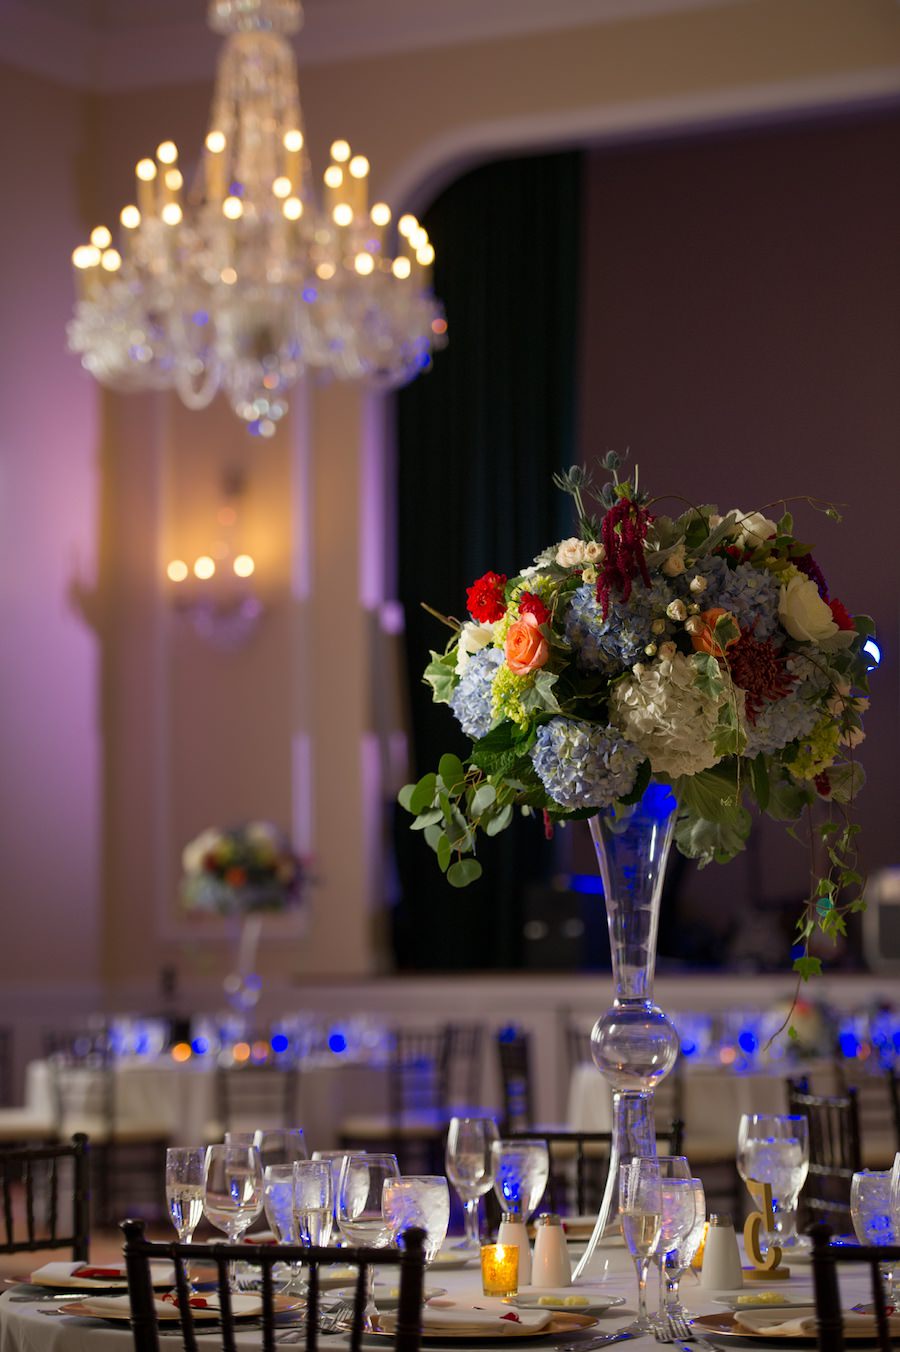 Classic Wedding Reception with Crystal Chandelier and Ivory, Blue and Cranberry Centerpieces in Tall Glass Vase | Tampa Wedding Photographer Andi Diamond Photography